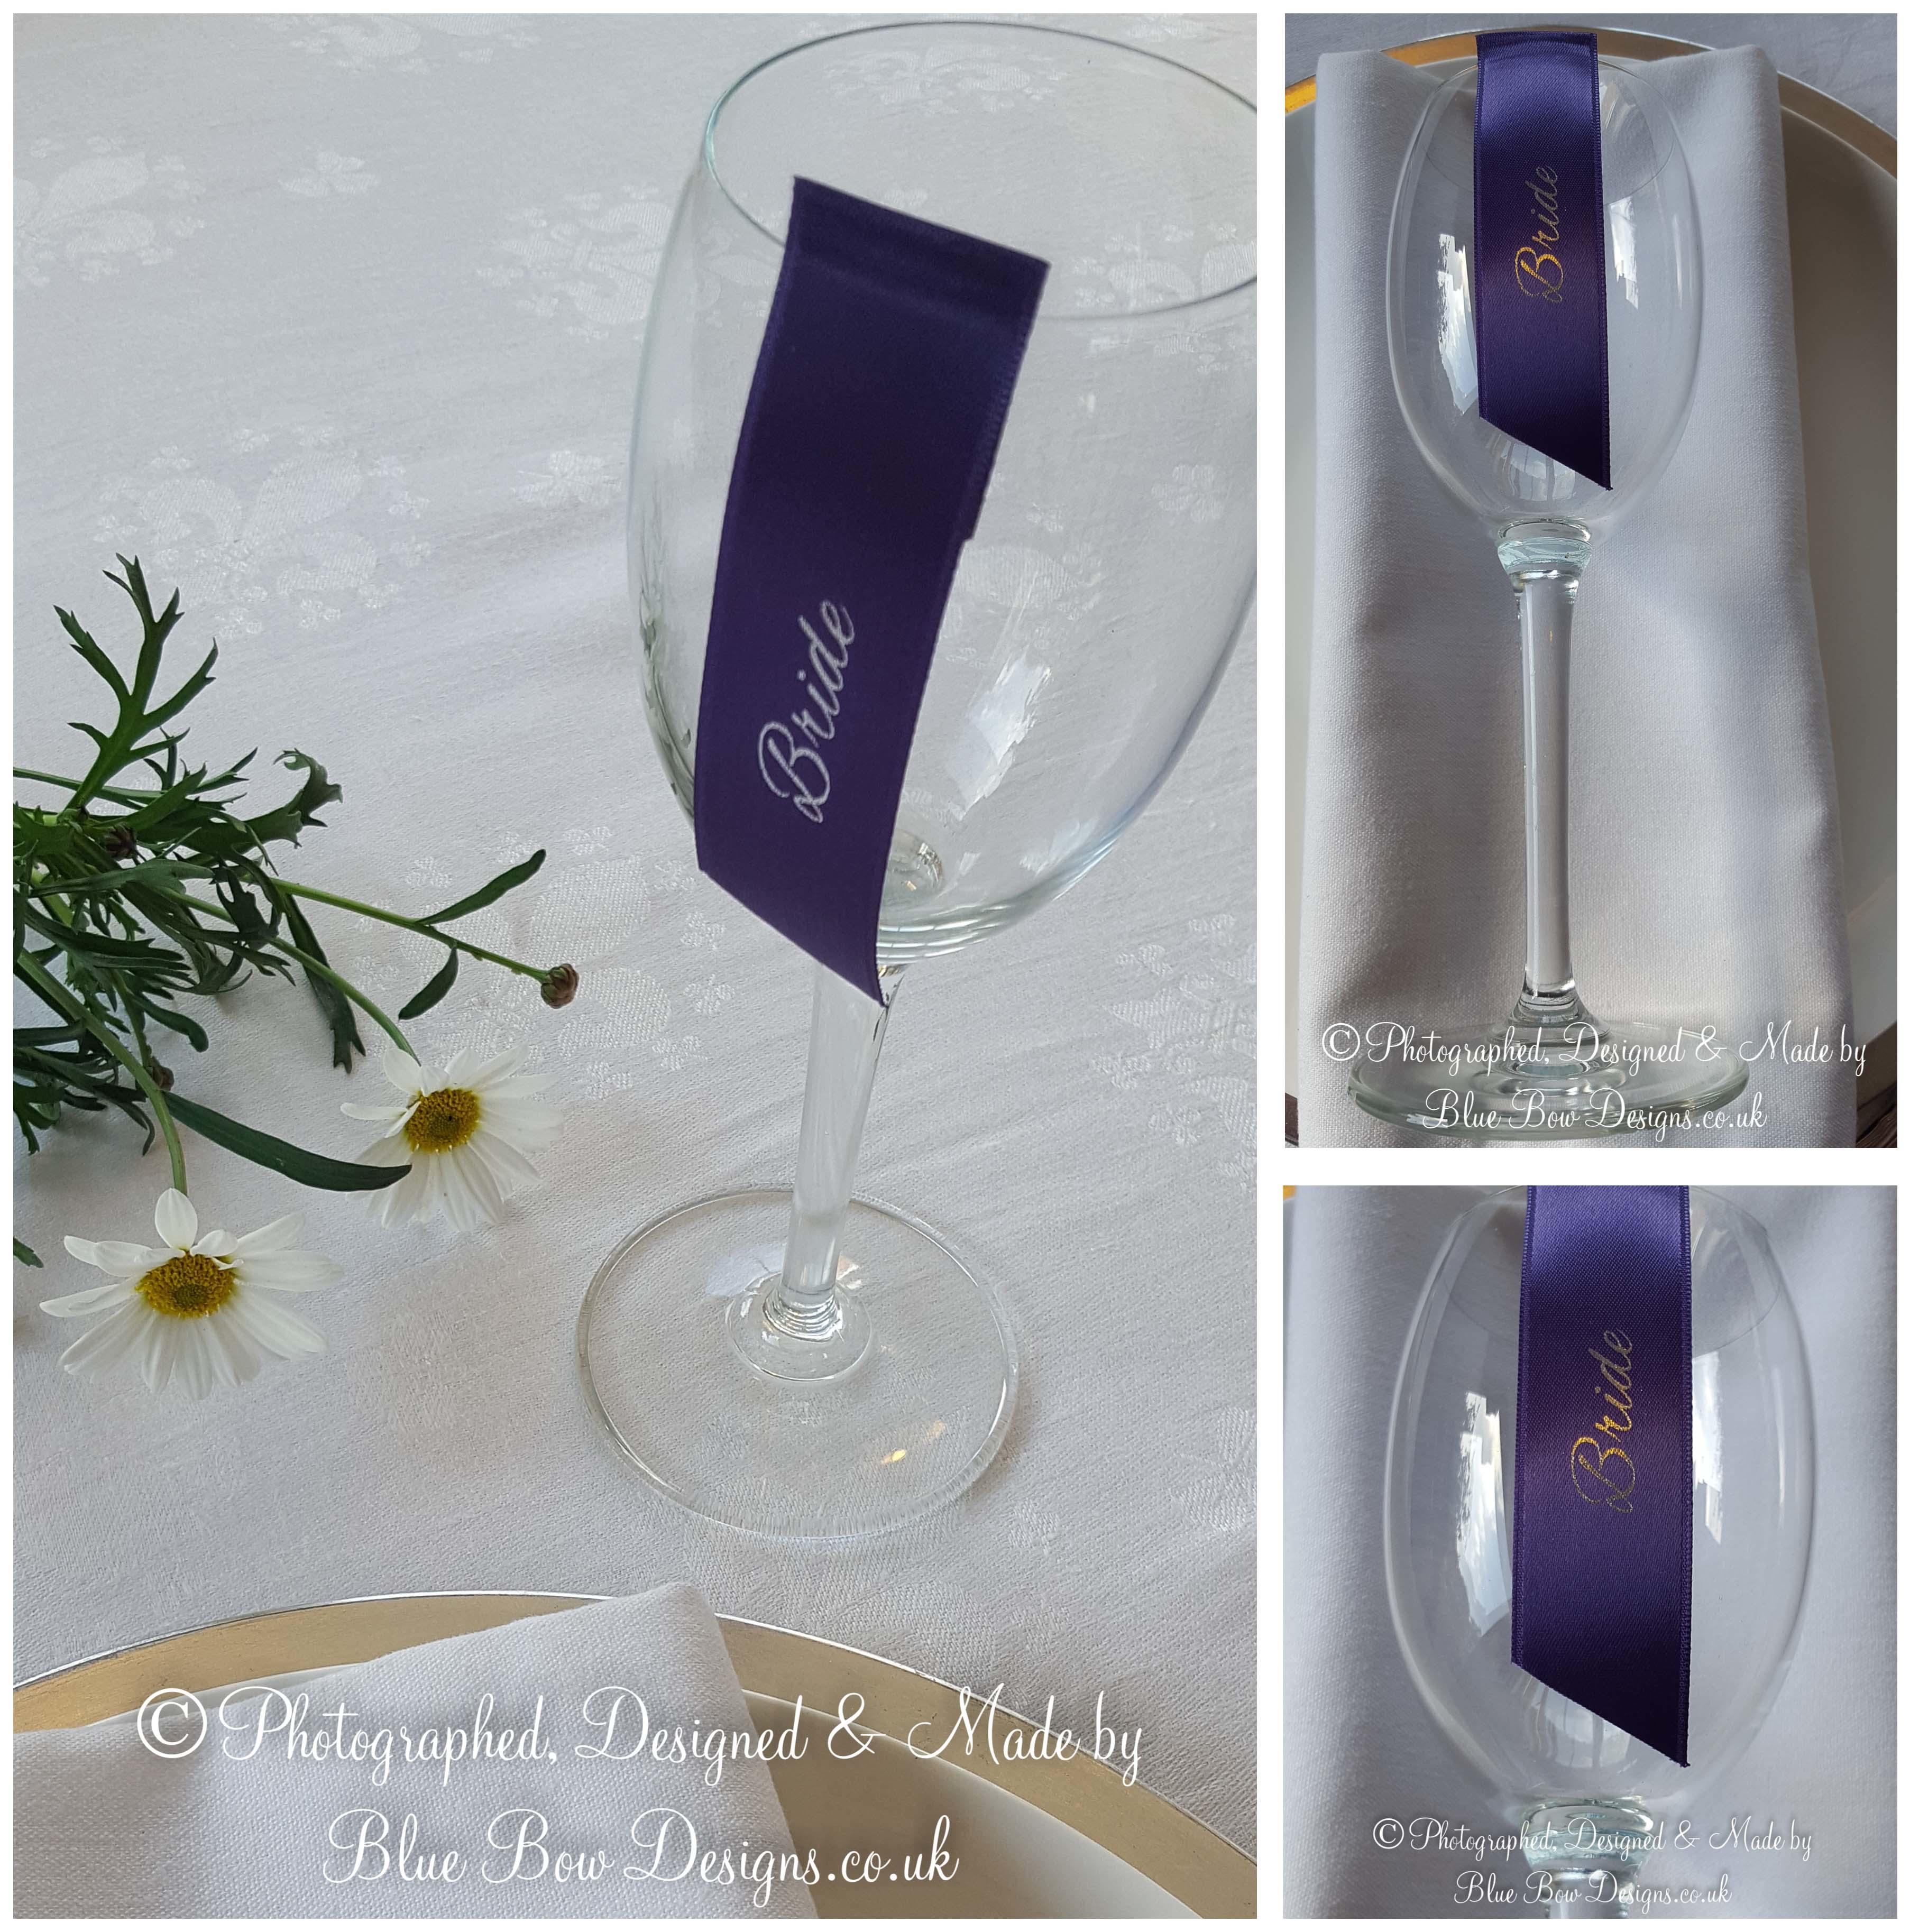 Guest name wine glass ribbons purple and silver